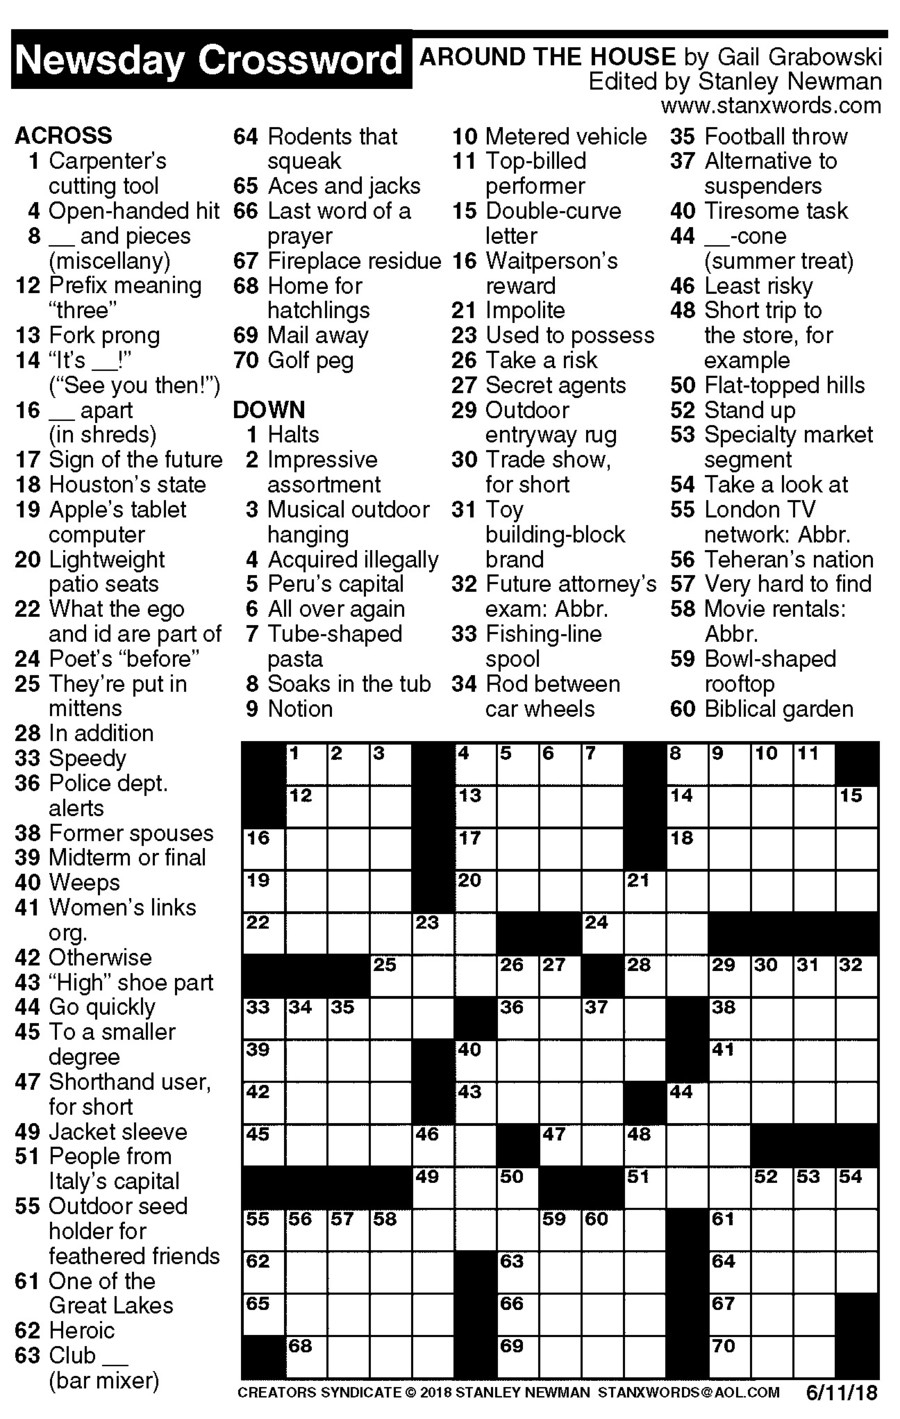 Newsday Crossword Puzzle For Jun 11, 2018,stanley Newman - Printable Crossword Puzzles Newsday